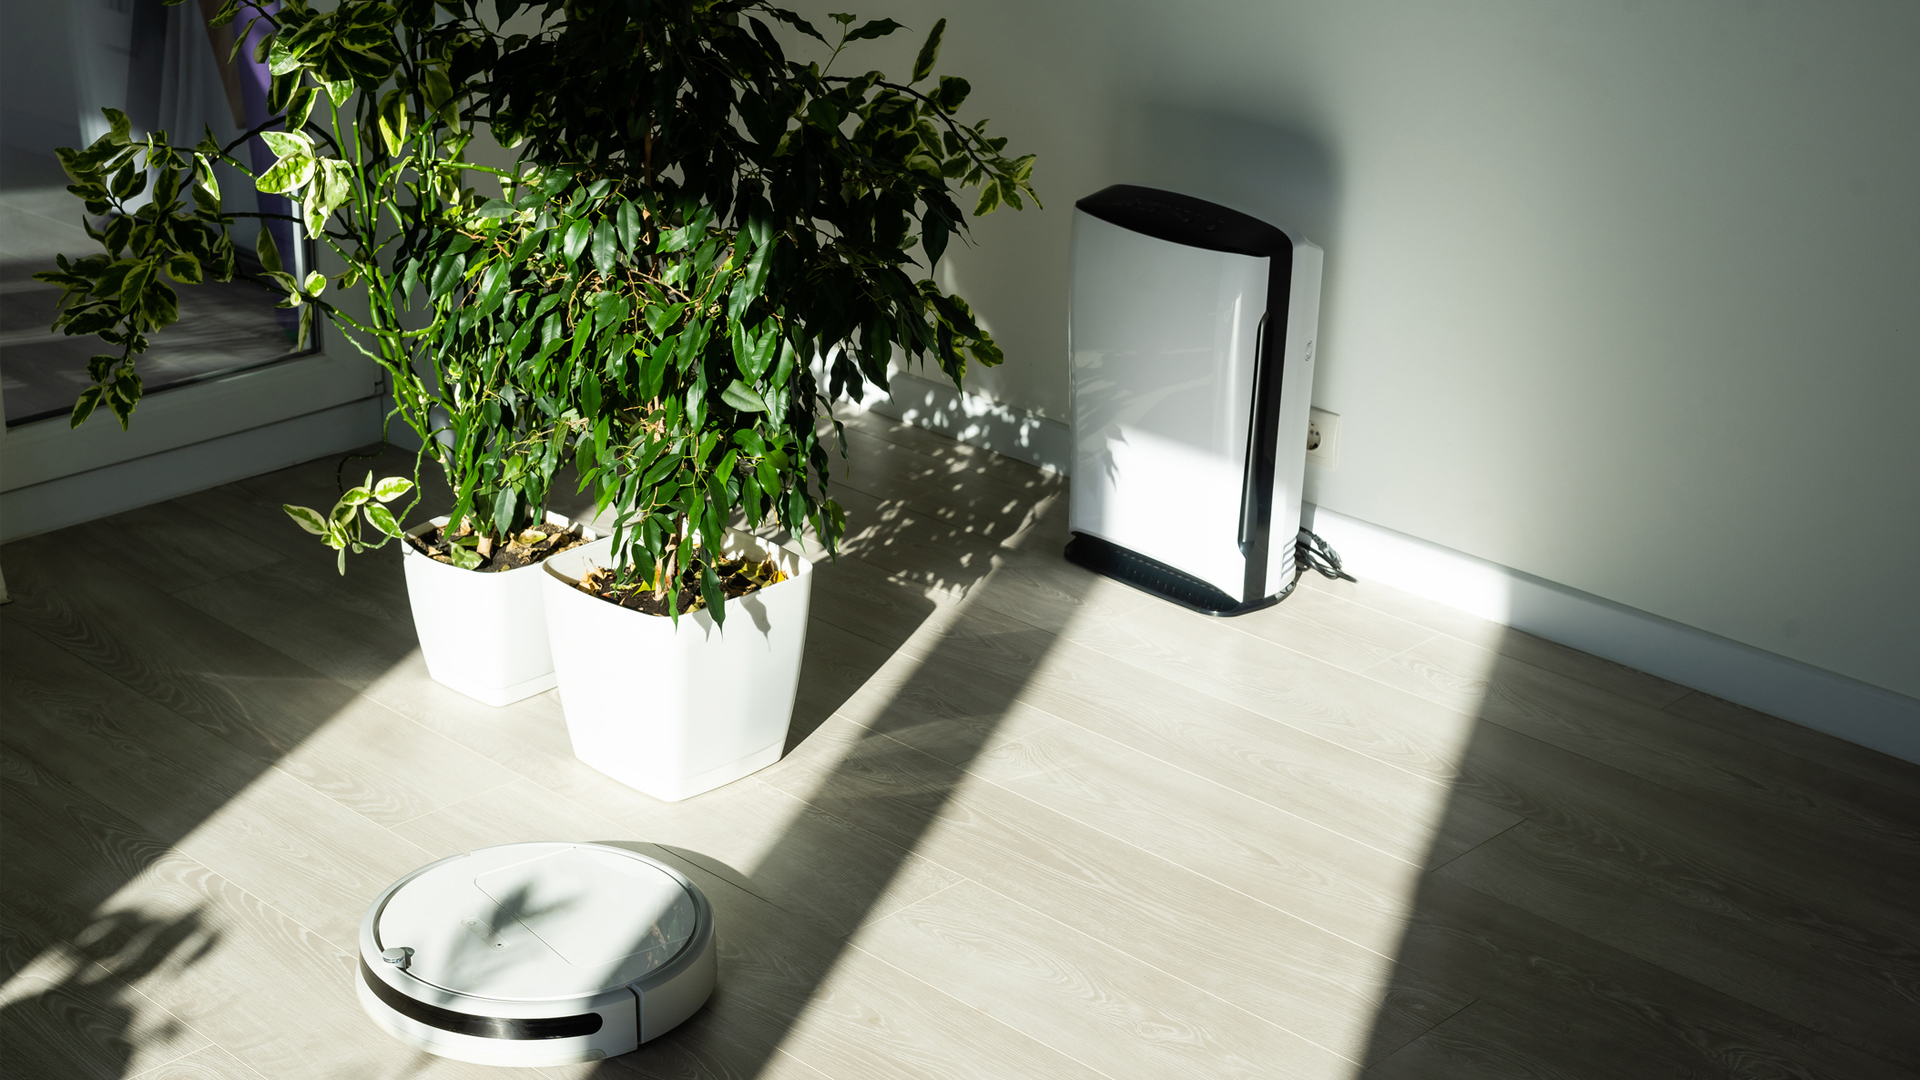 dehumidifier in an apartment besides some plants